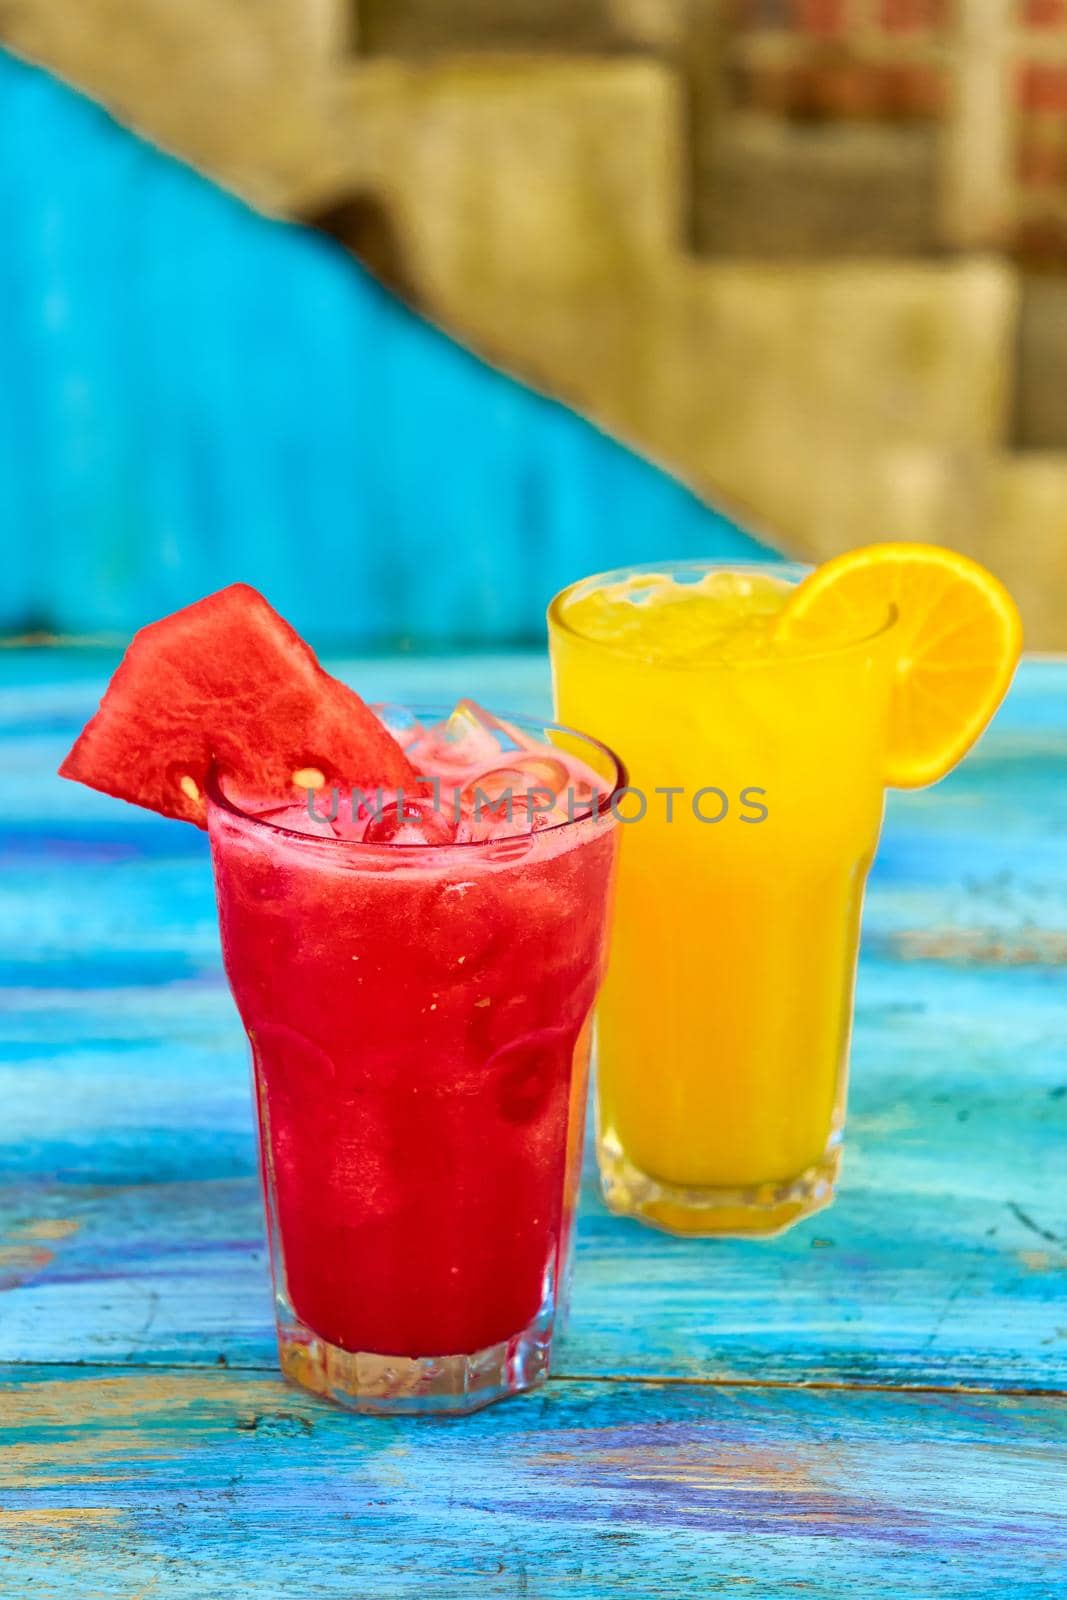 Two glass glasses with refreshing drinks from orange and watermelon juice